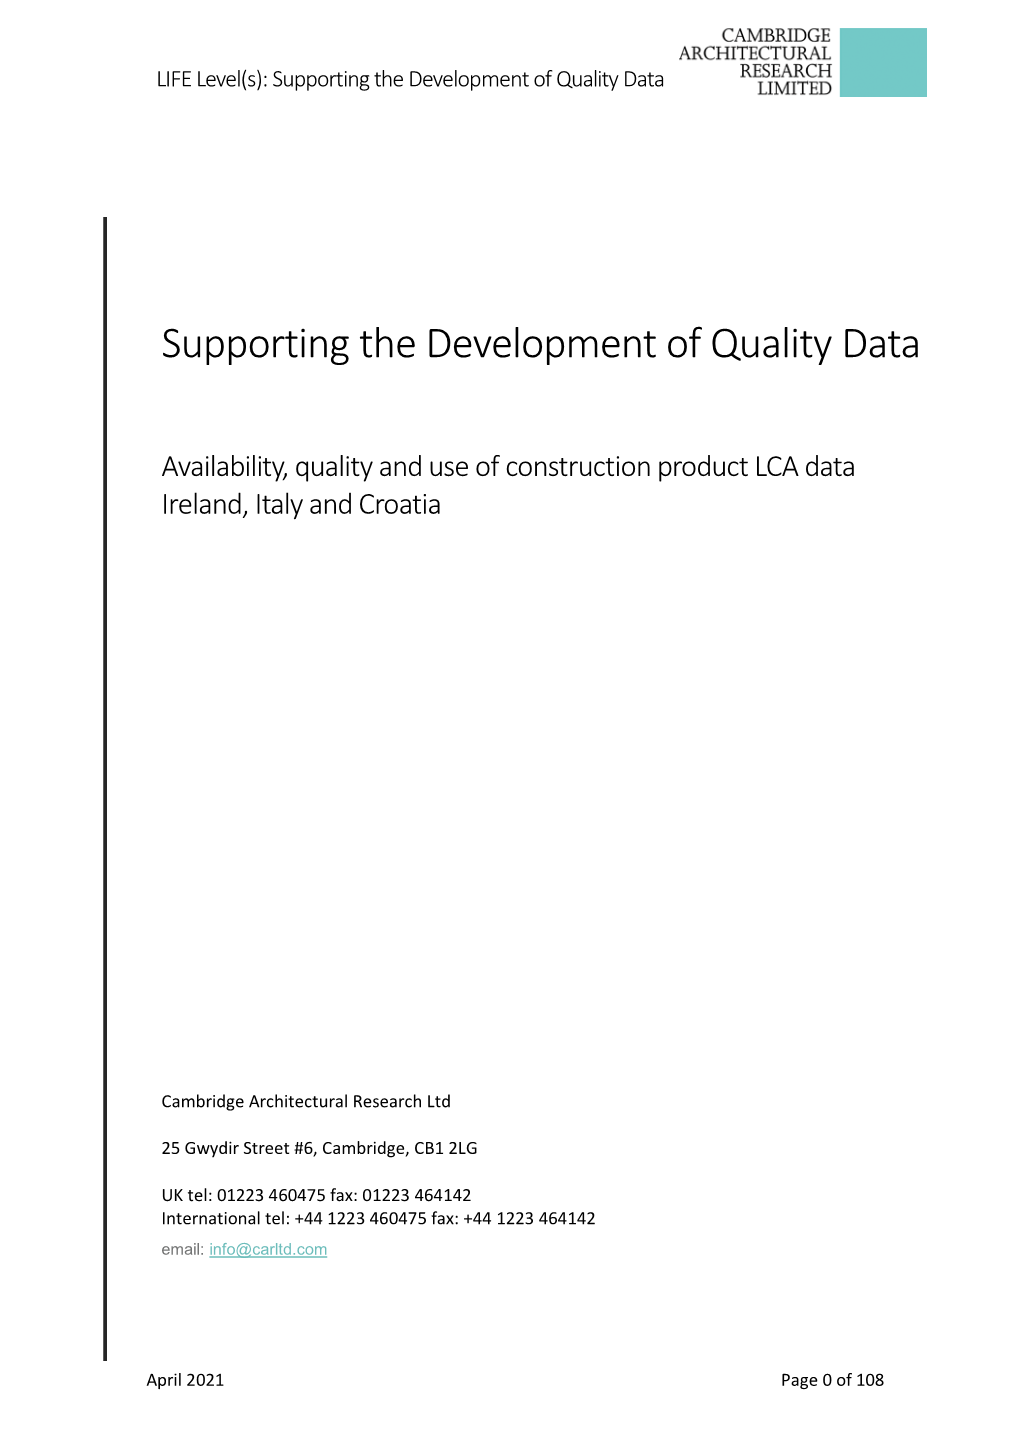 Supporting the Development of Quality Data